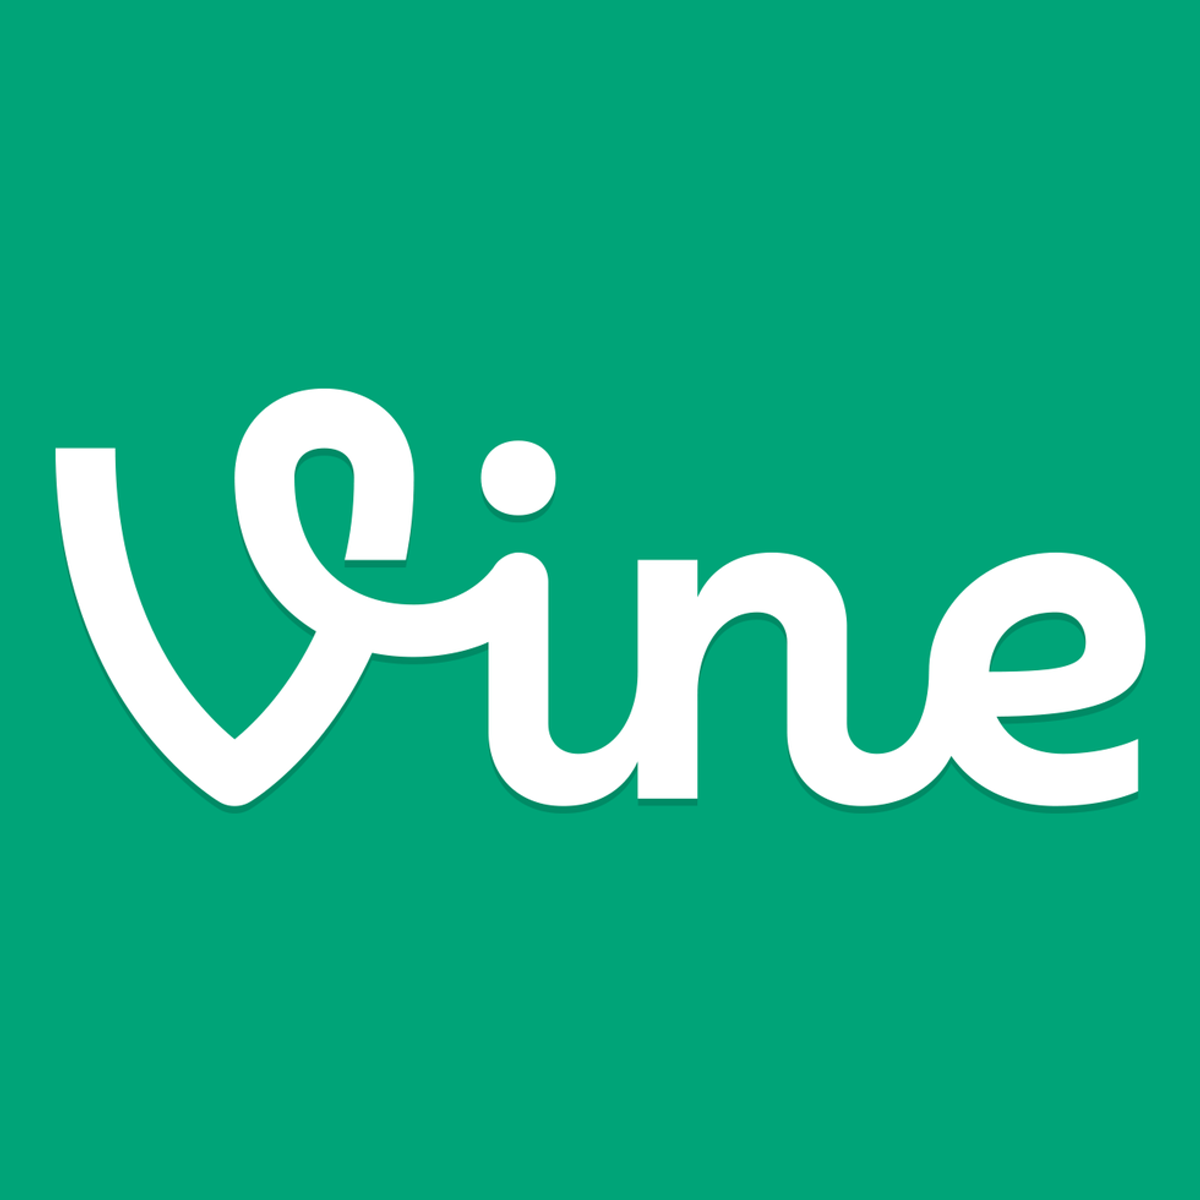 The End of Vine